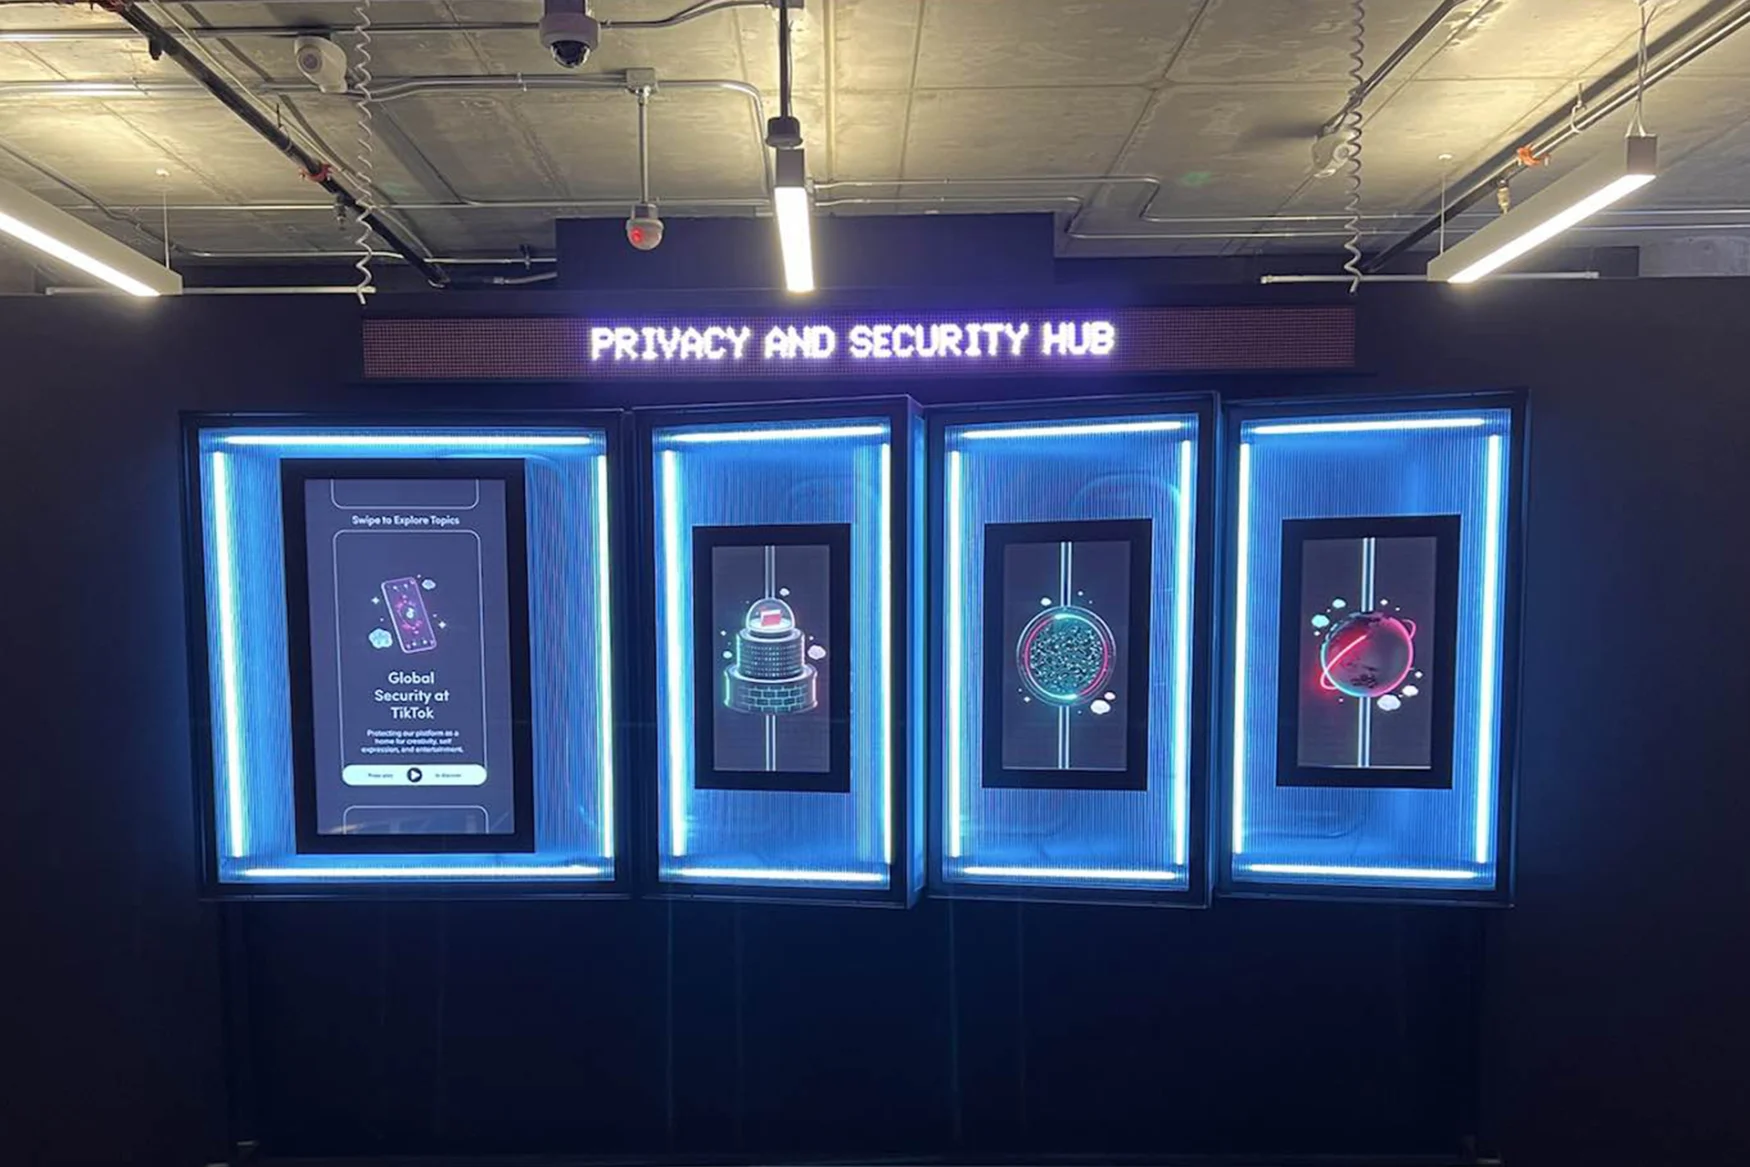 Interactive displays that are part of the 